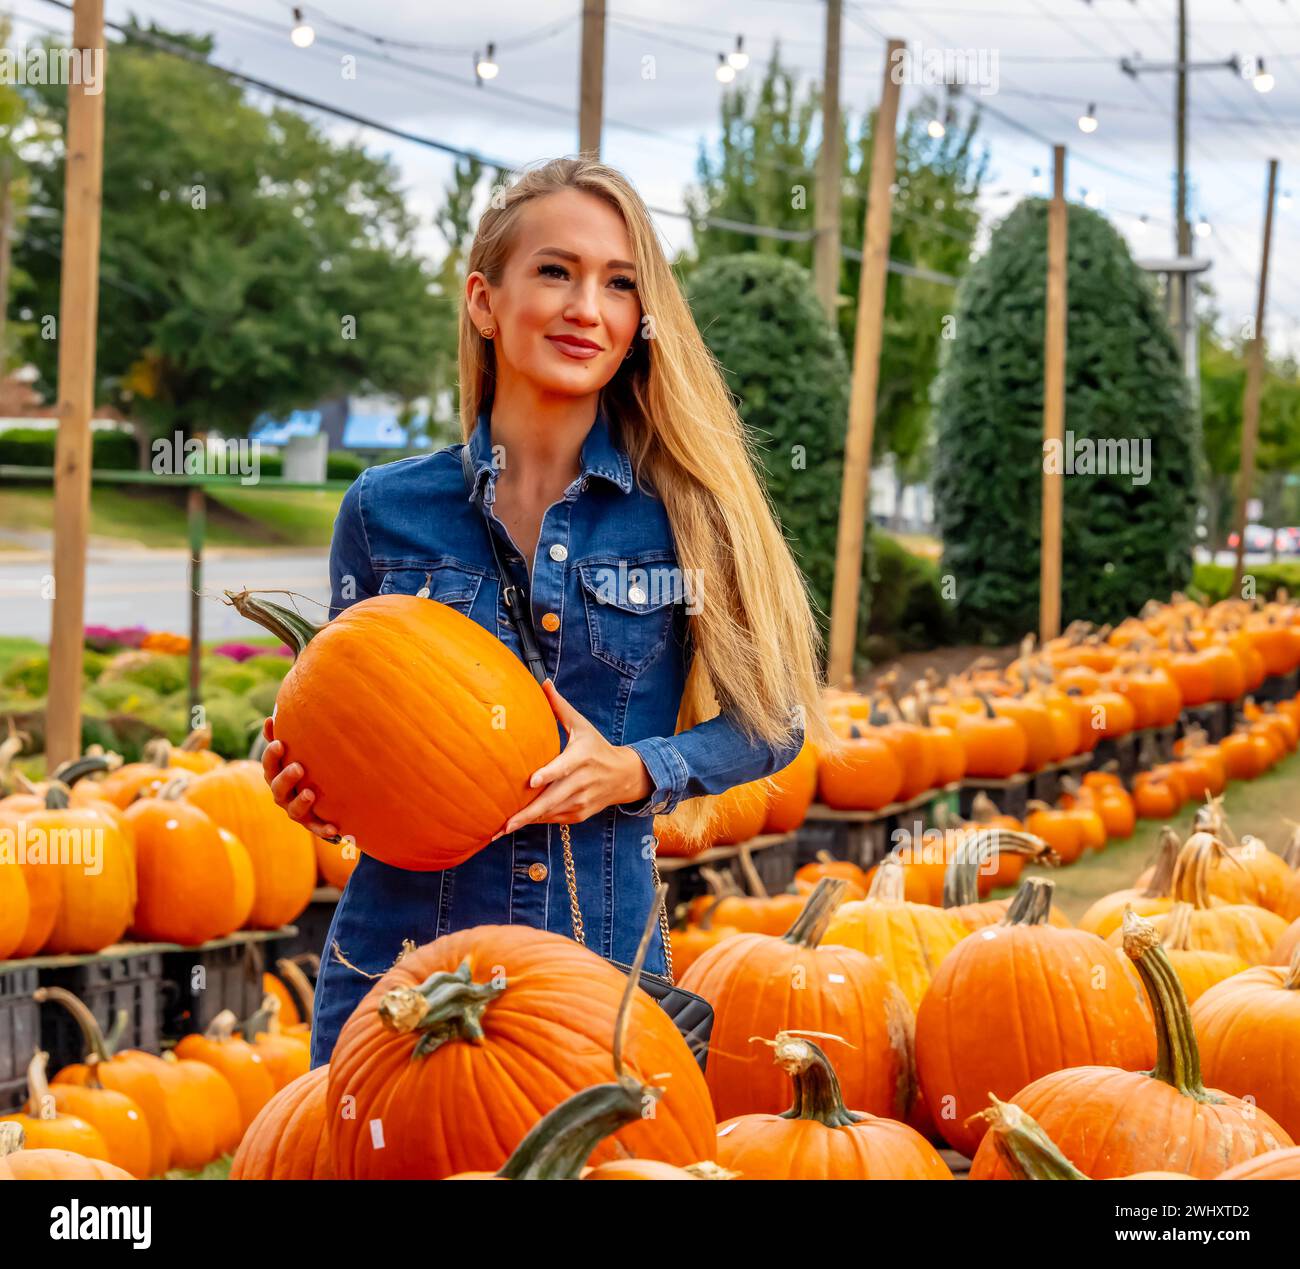 A Lovely Blonde European Model Enjoys Shopping For Pumpkins And Flowers For Halloween Holiday Stock Photo